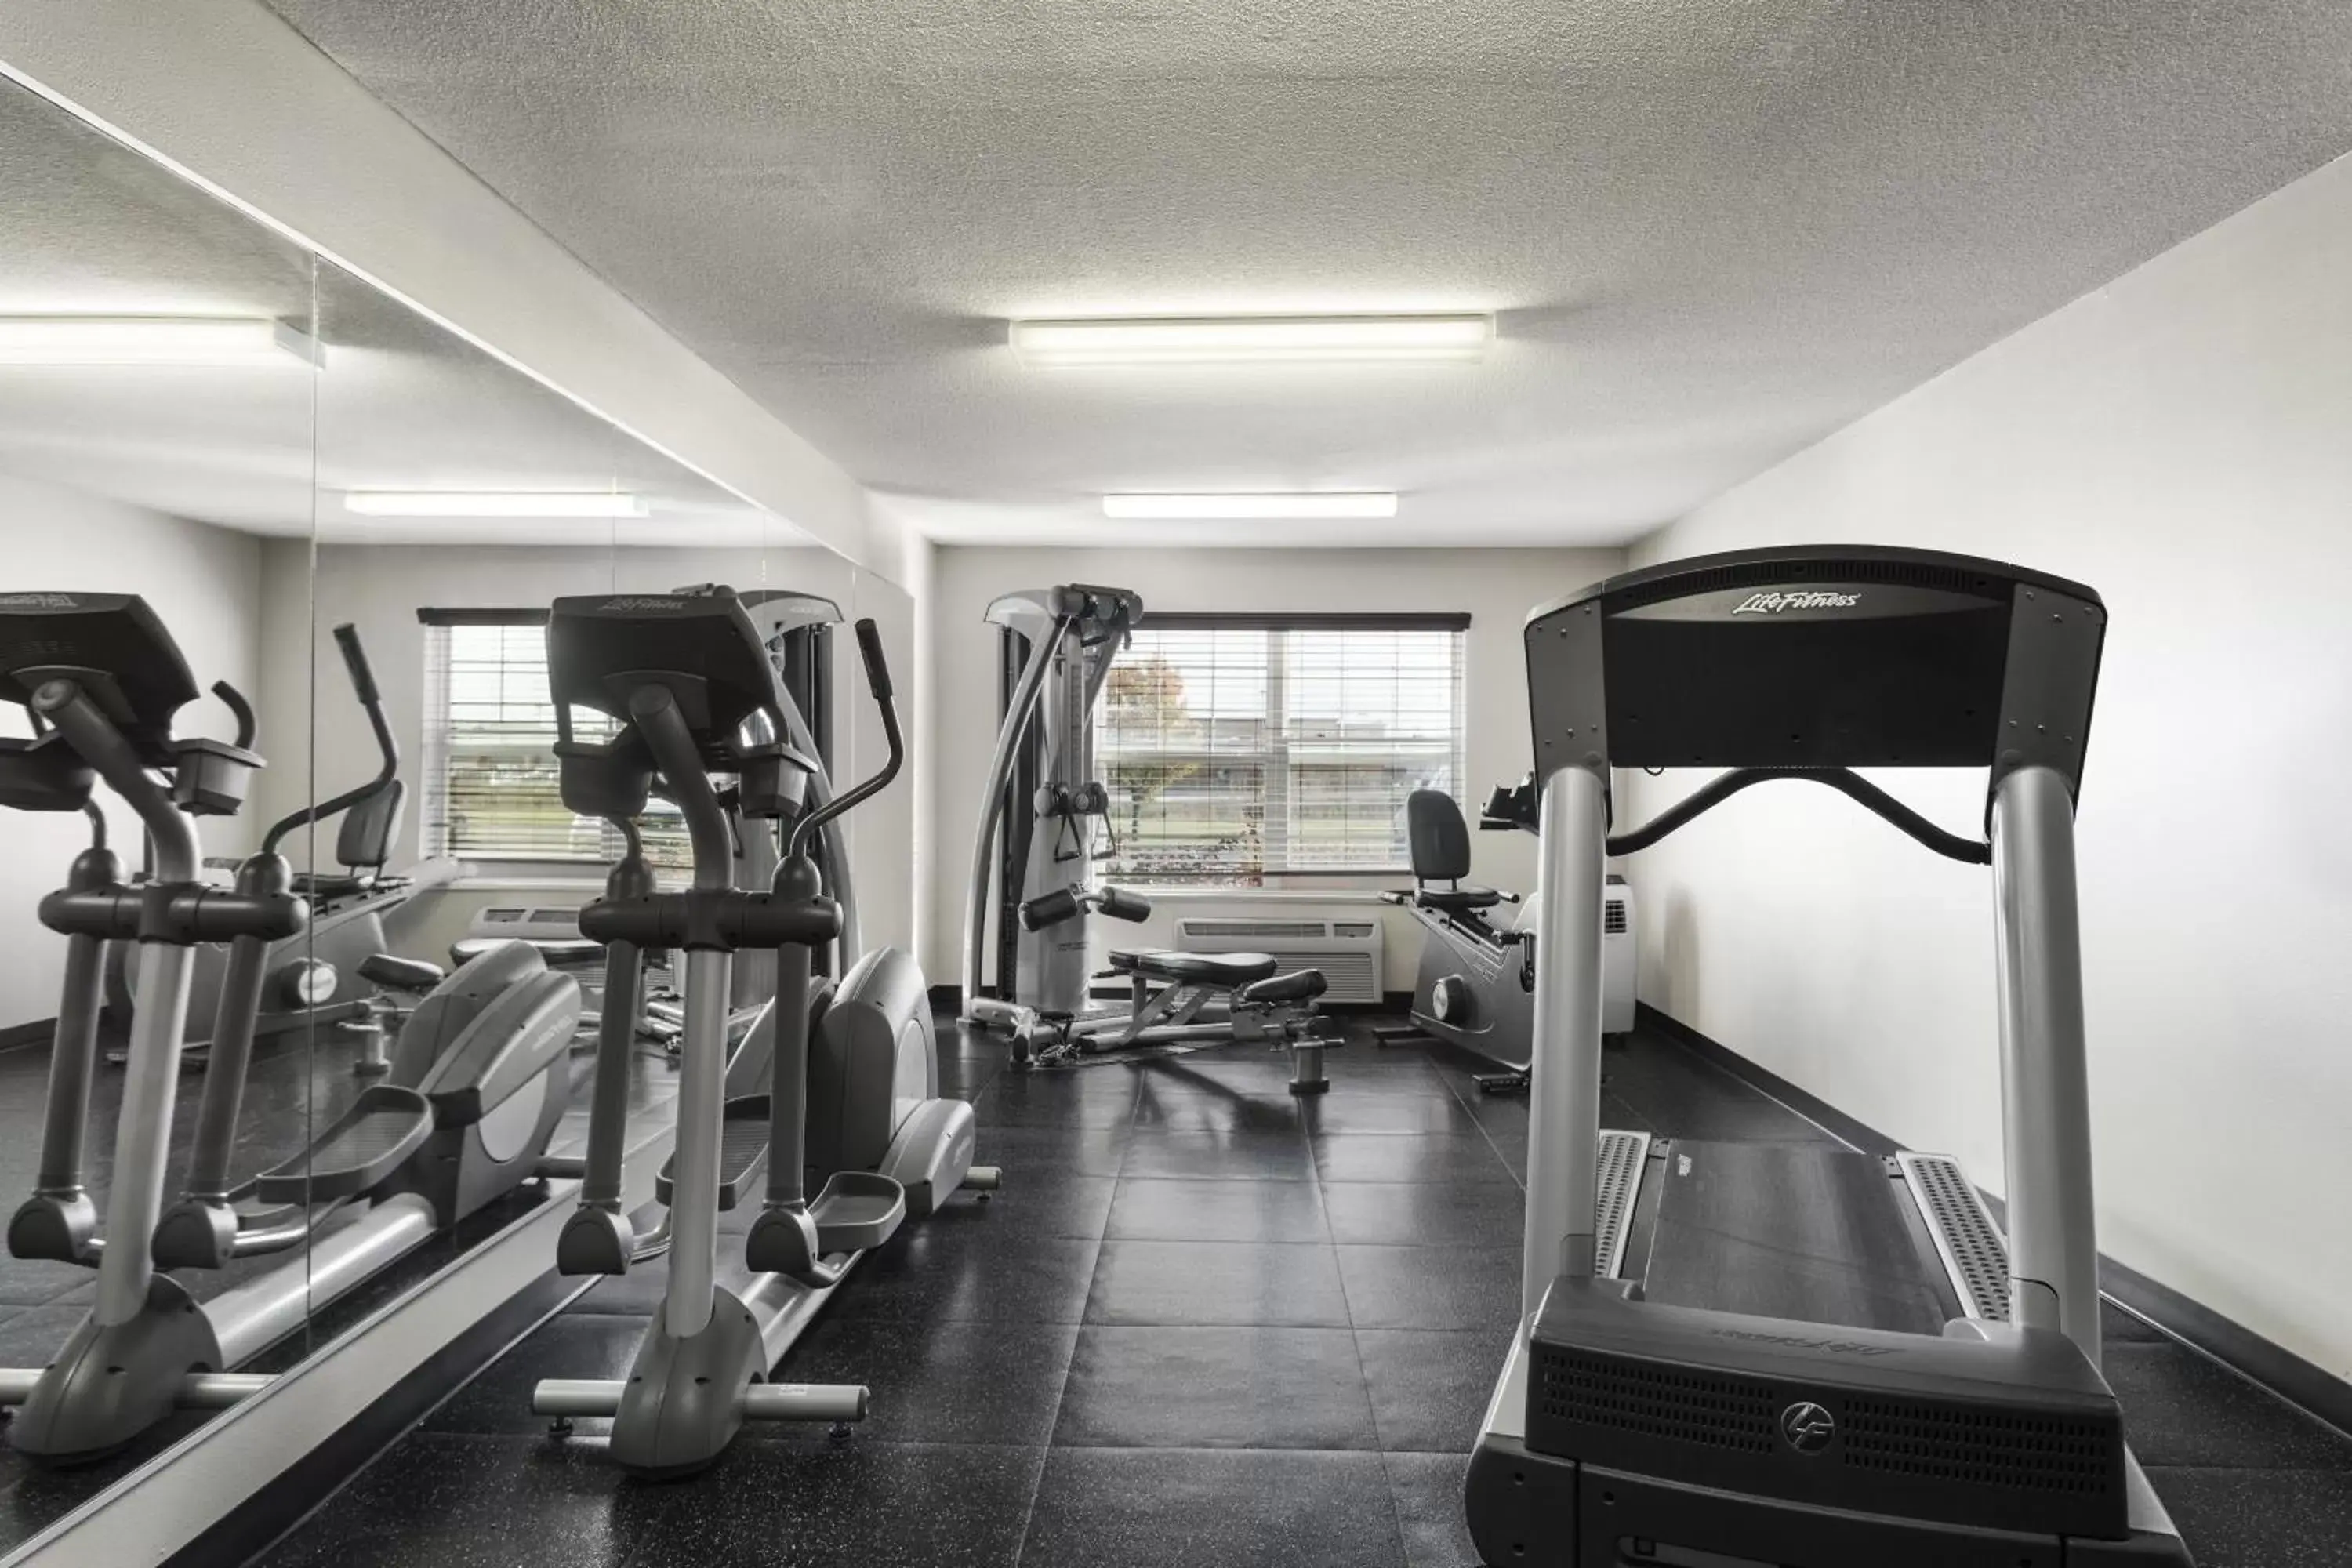 Fitness centre/facilities, Fitness Center/Facilities in Country Inn & Suites by Radisson, Fort Dodge, IA